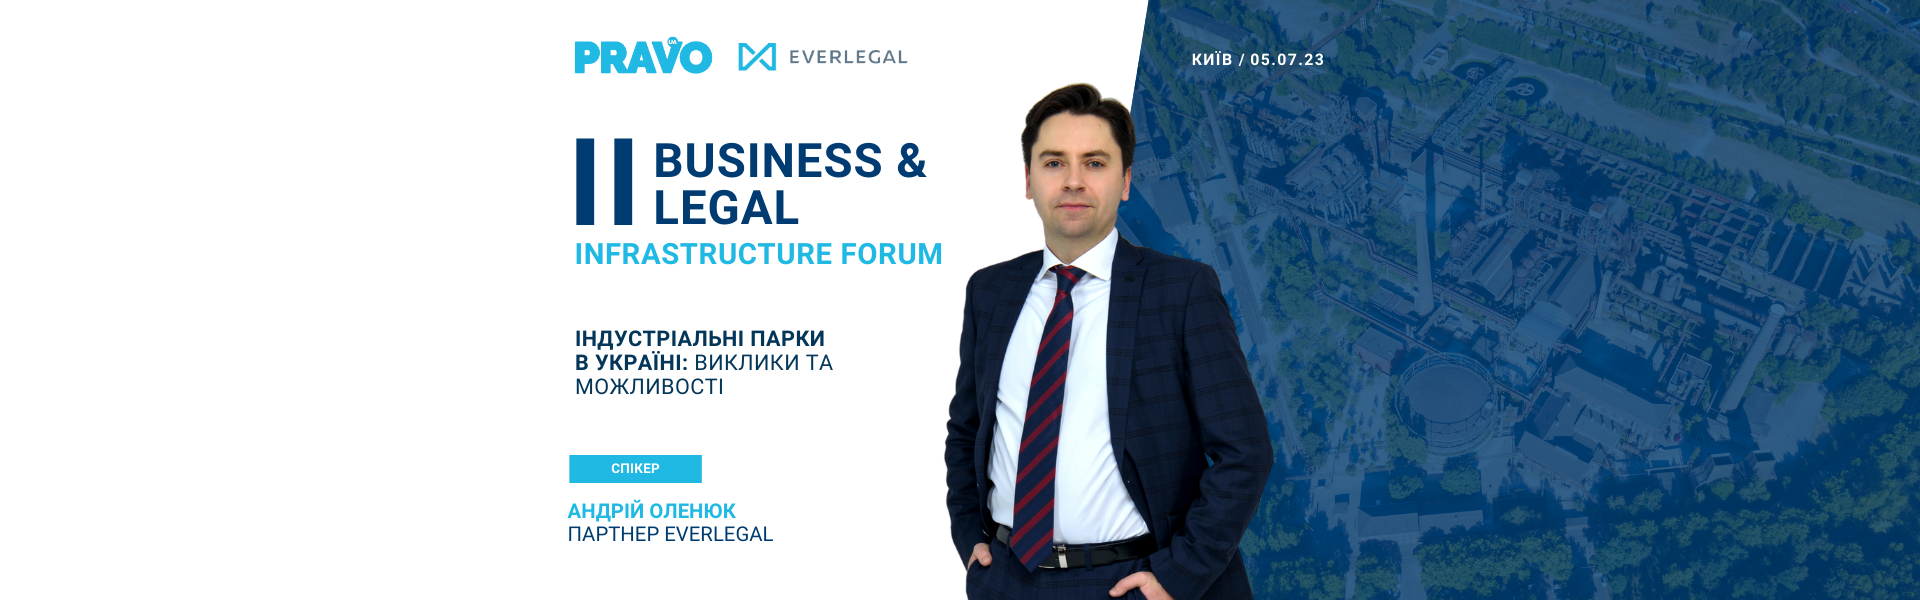 Welcome to the ІІ Business & Legal Infrastructure Forum